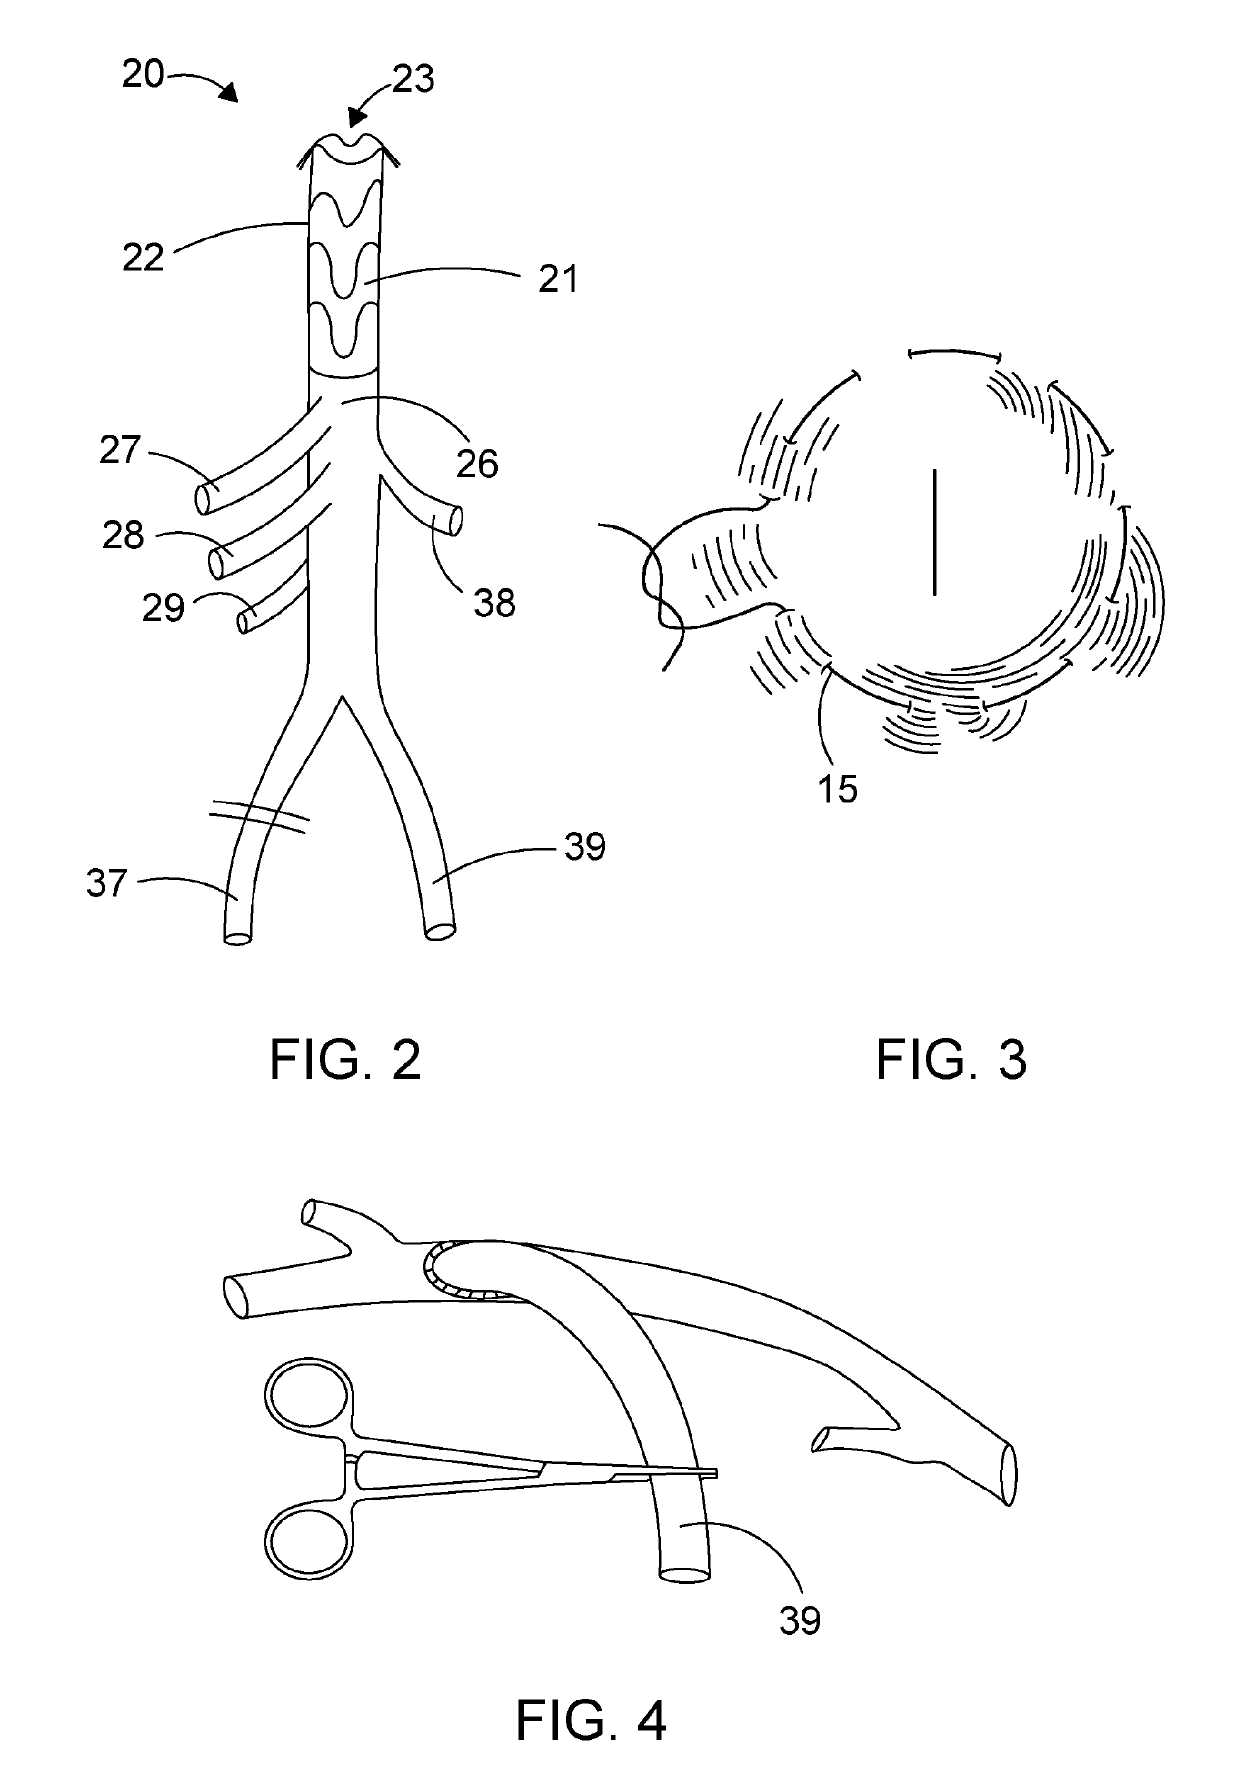 Hybrid prosthesis and delivery system